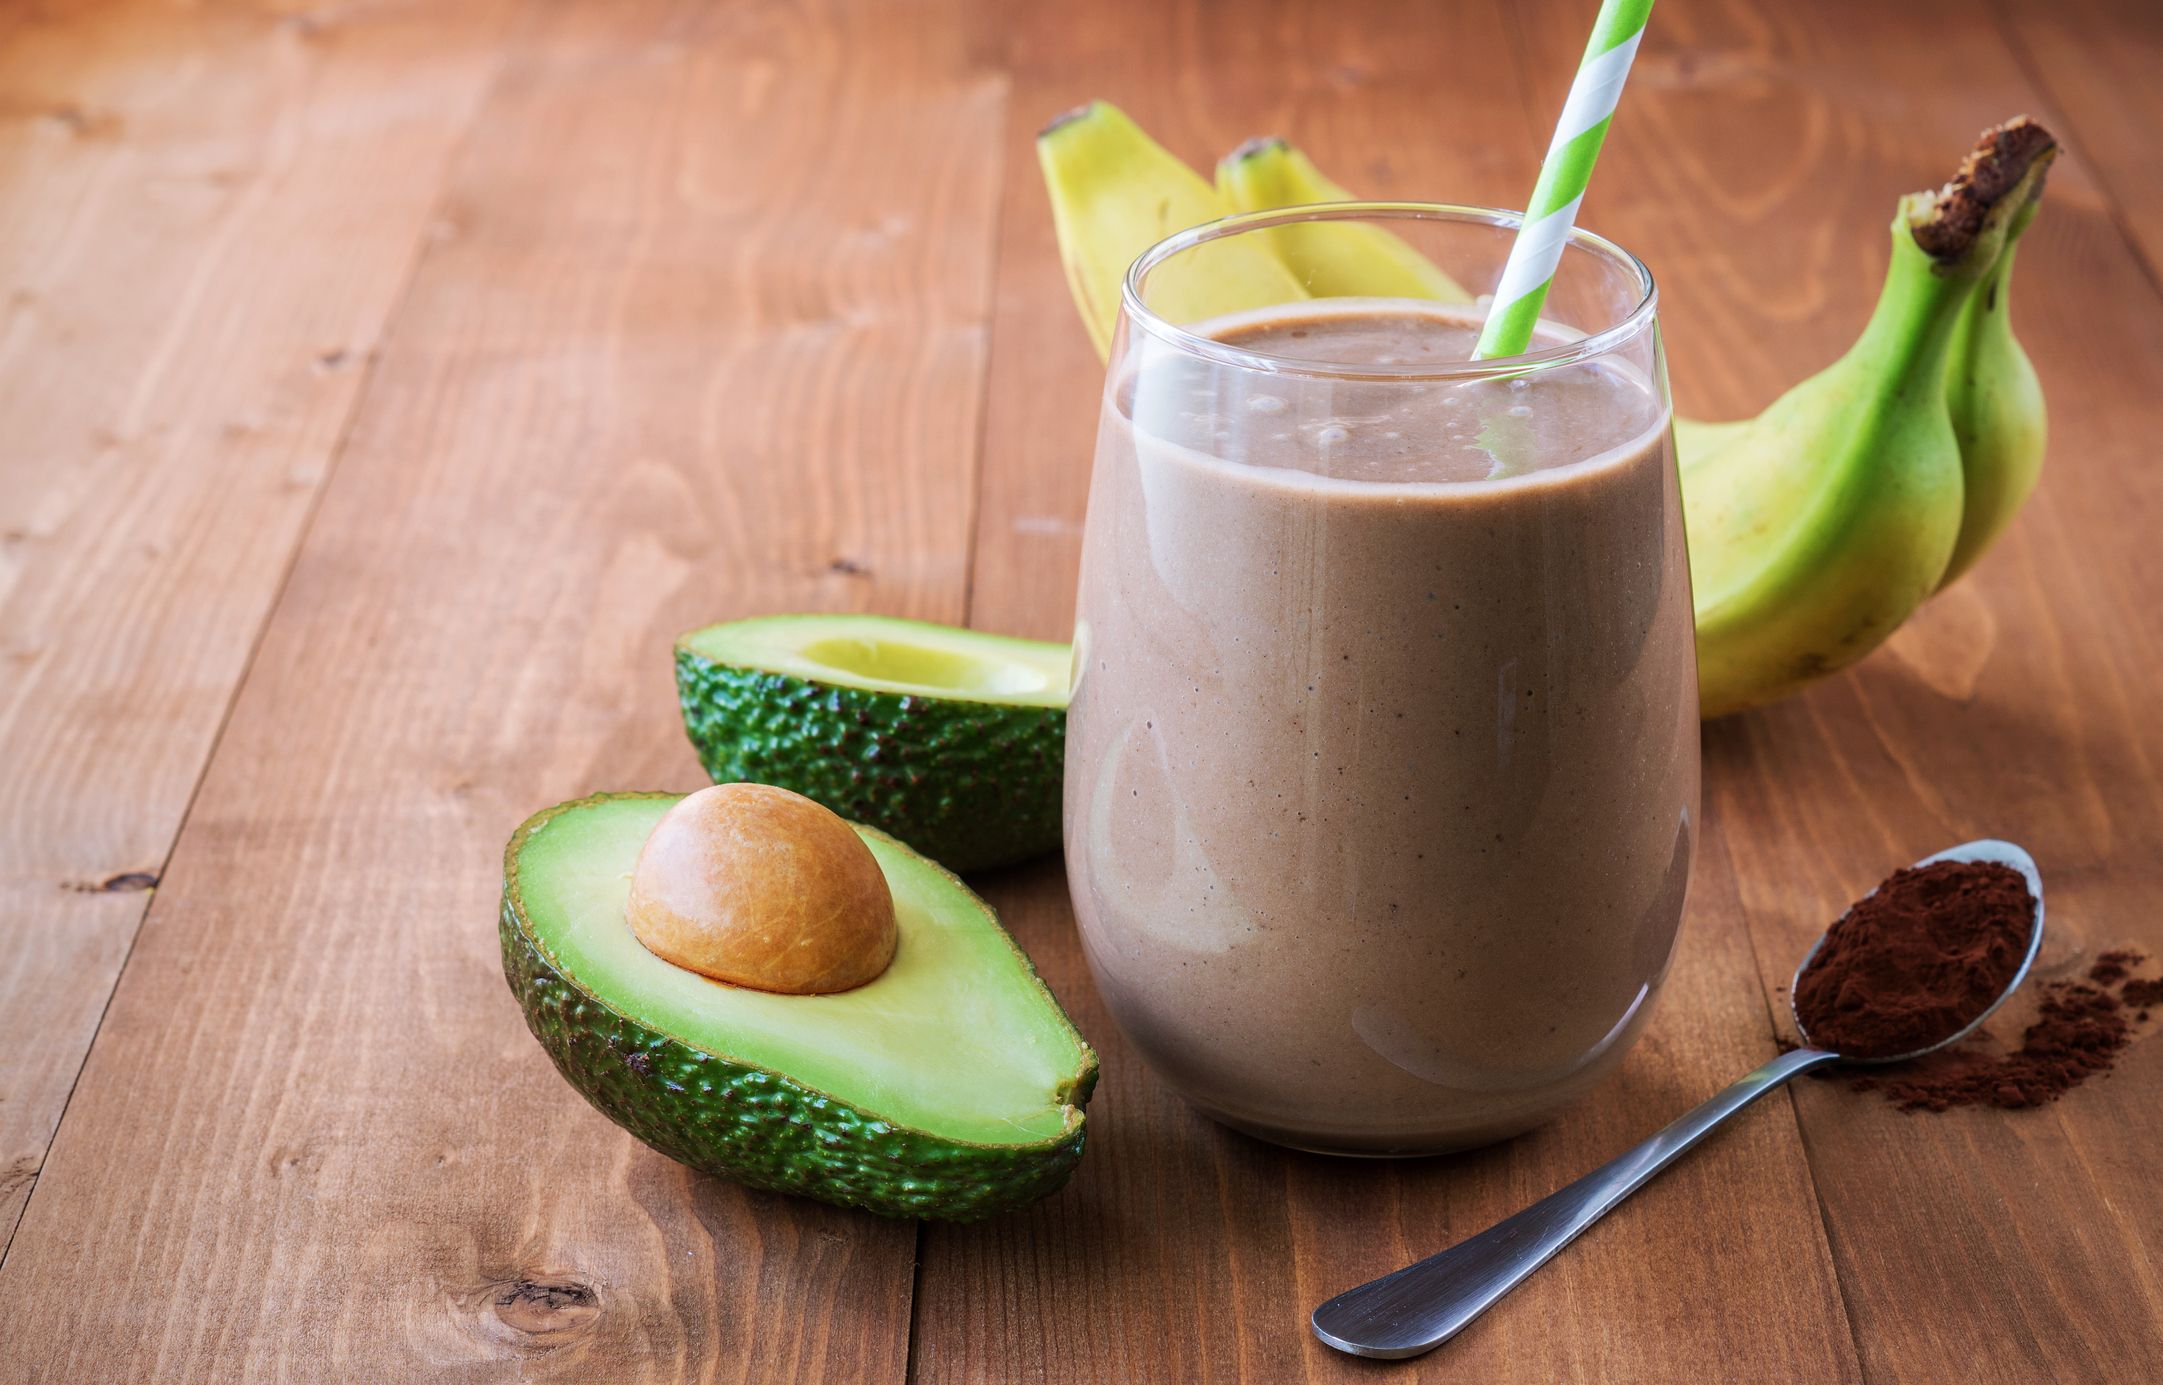 Chocolate protein in a glass with a straw next to banana and avocado